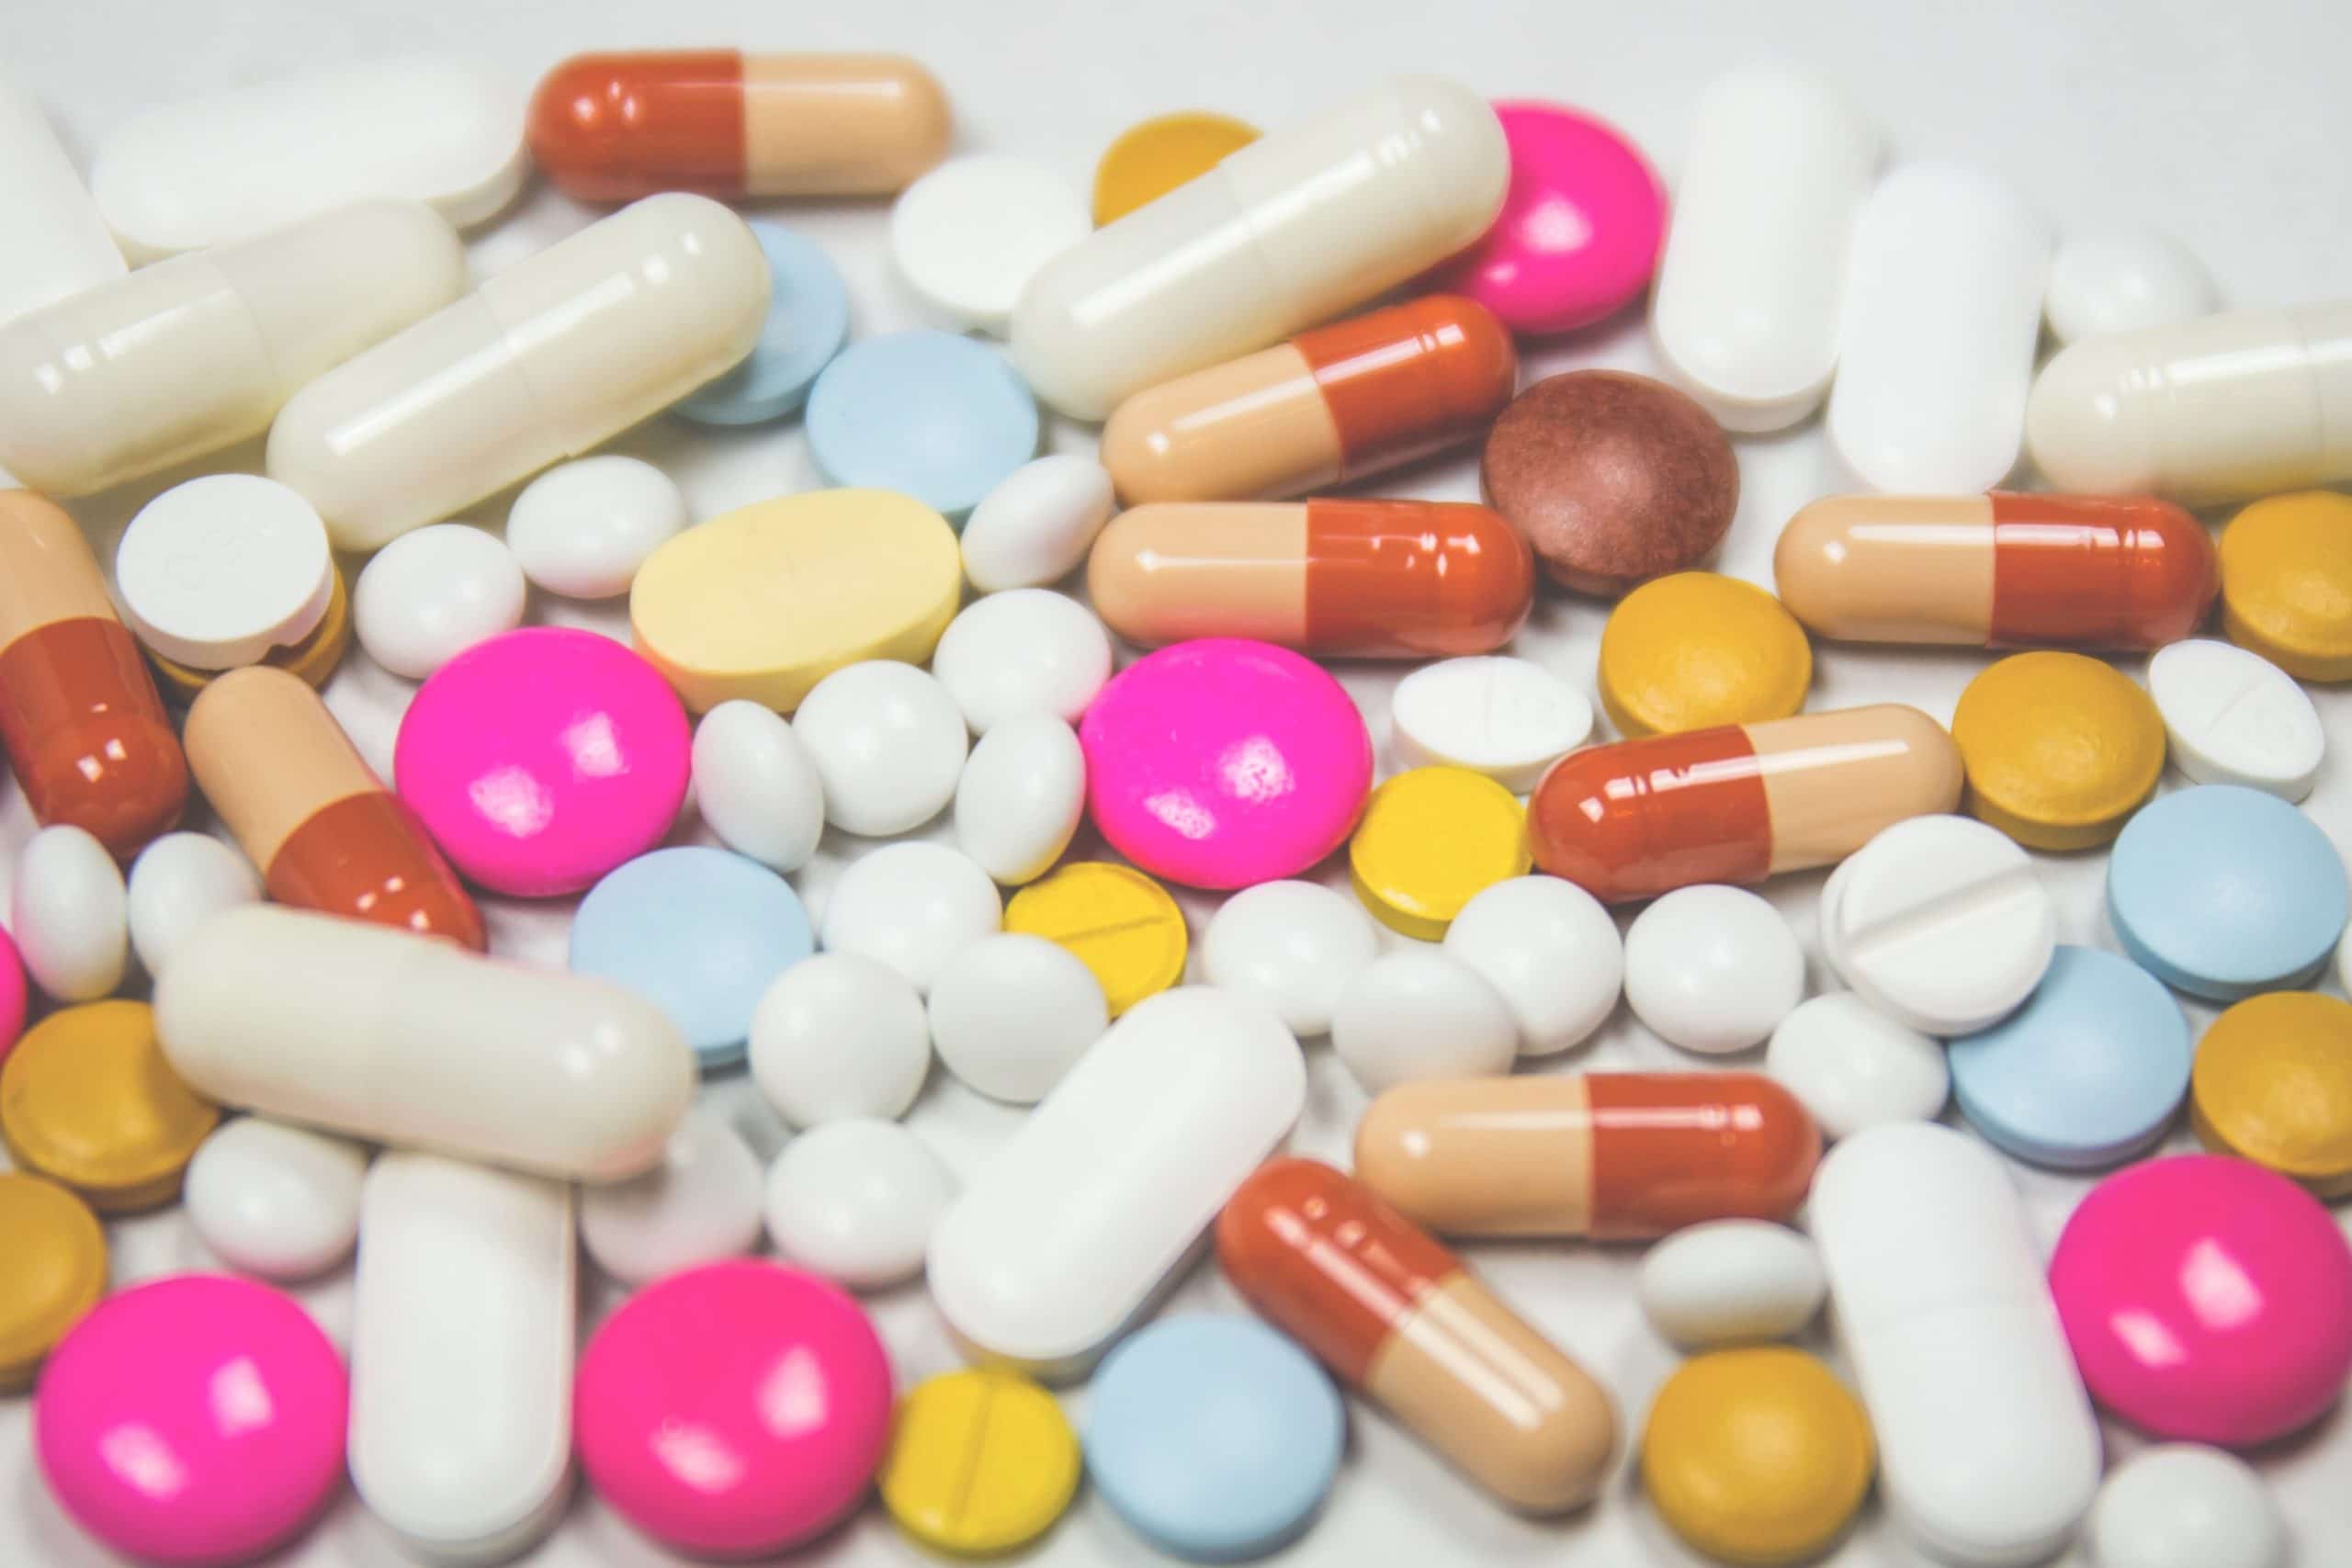 How to Organize Medicines and Supplements - Declutter in Minutes